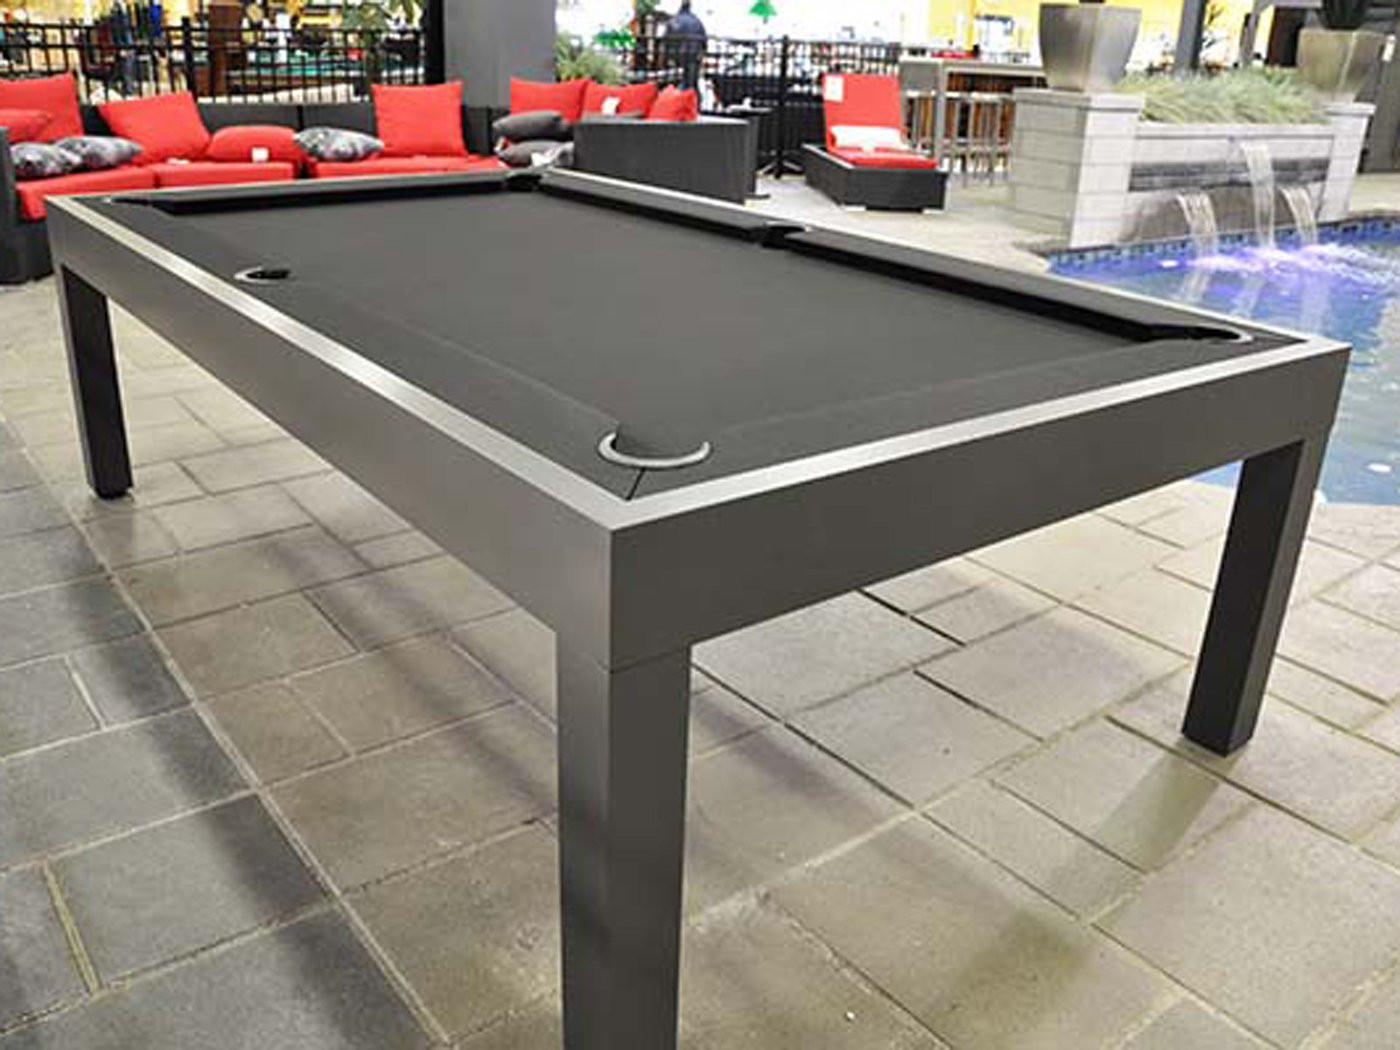 DIY Outdoor Pool Table
 Outdoor Pool And Dining Room Tables For Sale Diy Outdoor